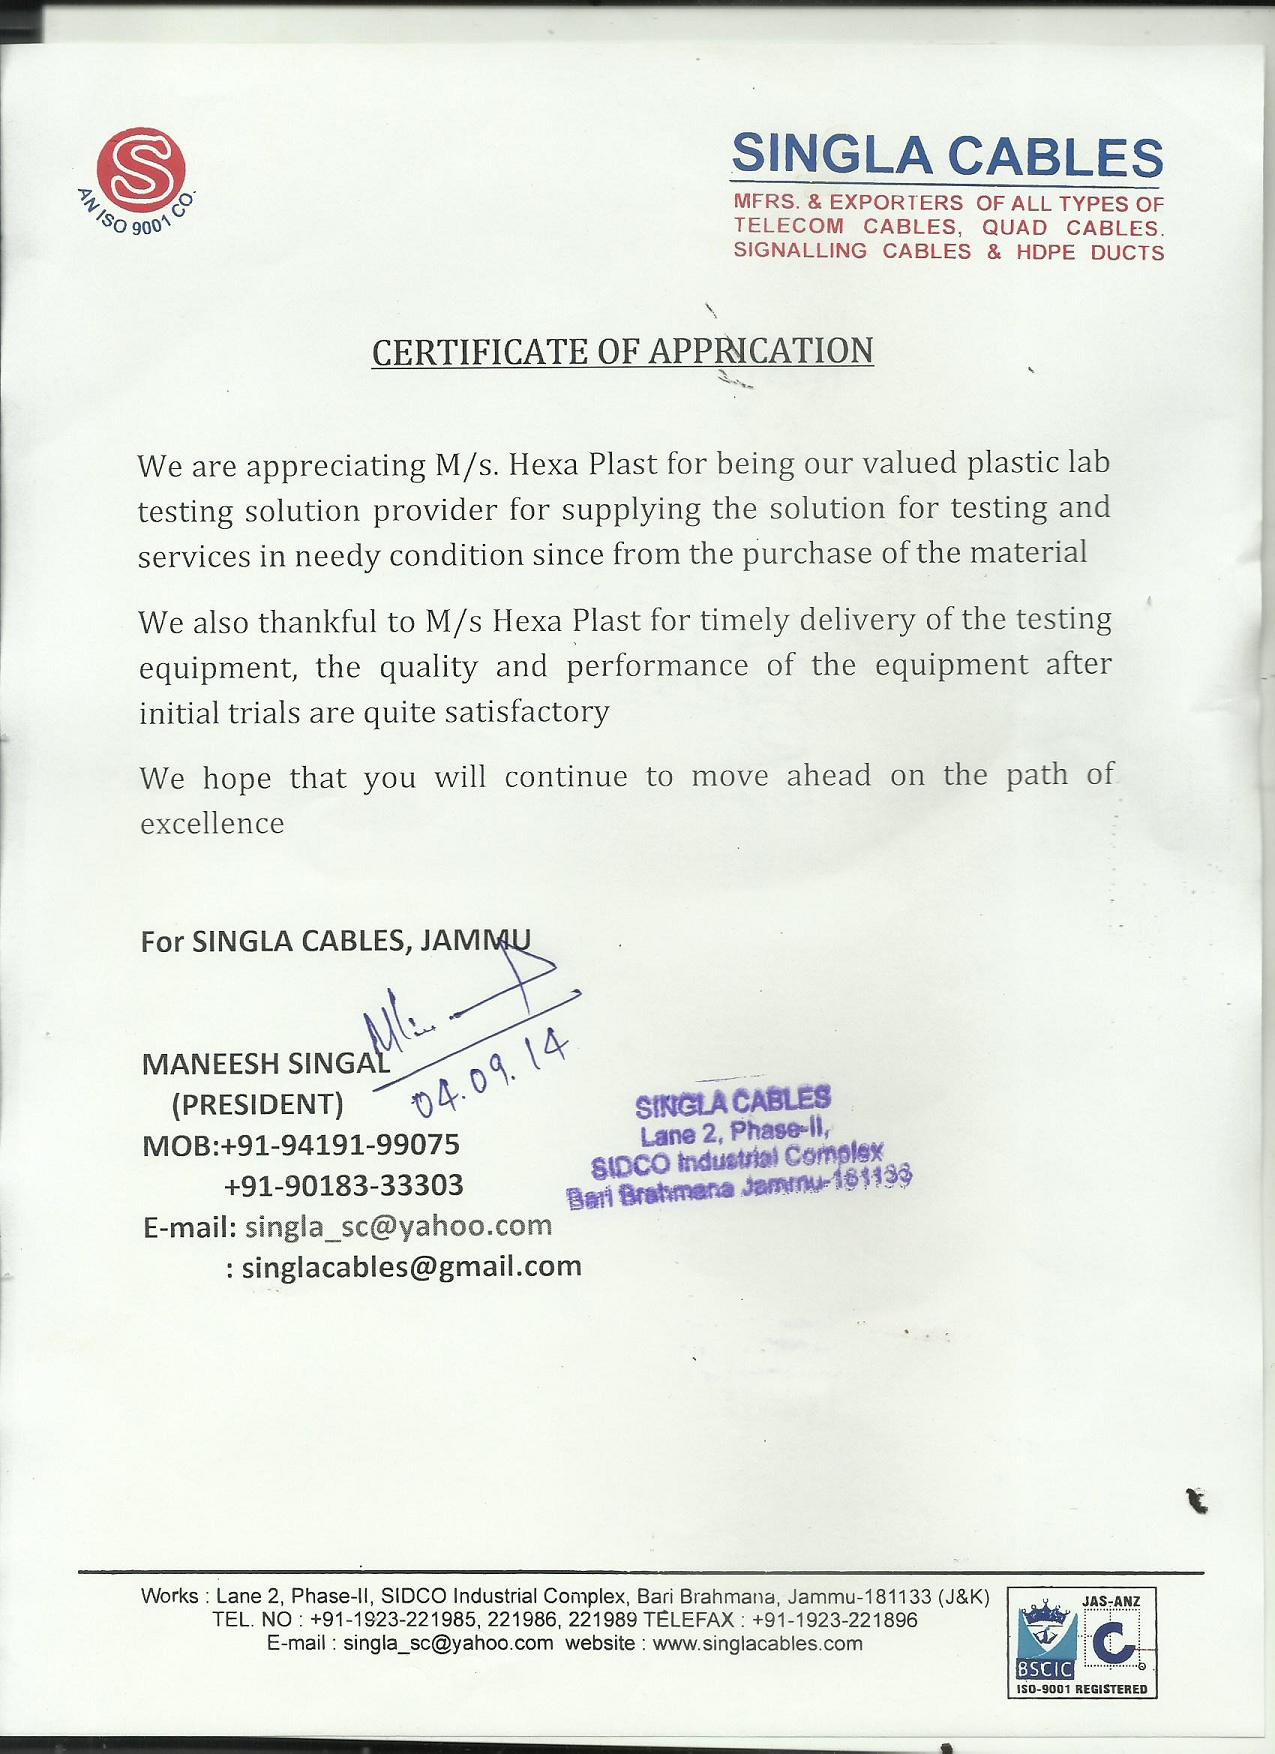 Image of Certificate of Appreciation by Singla Cables